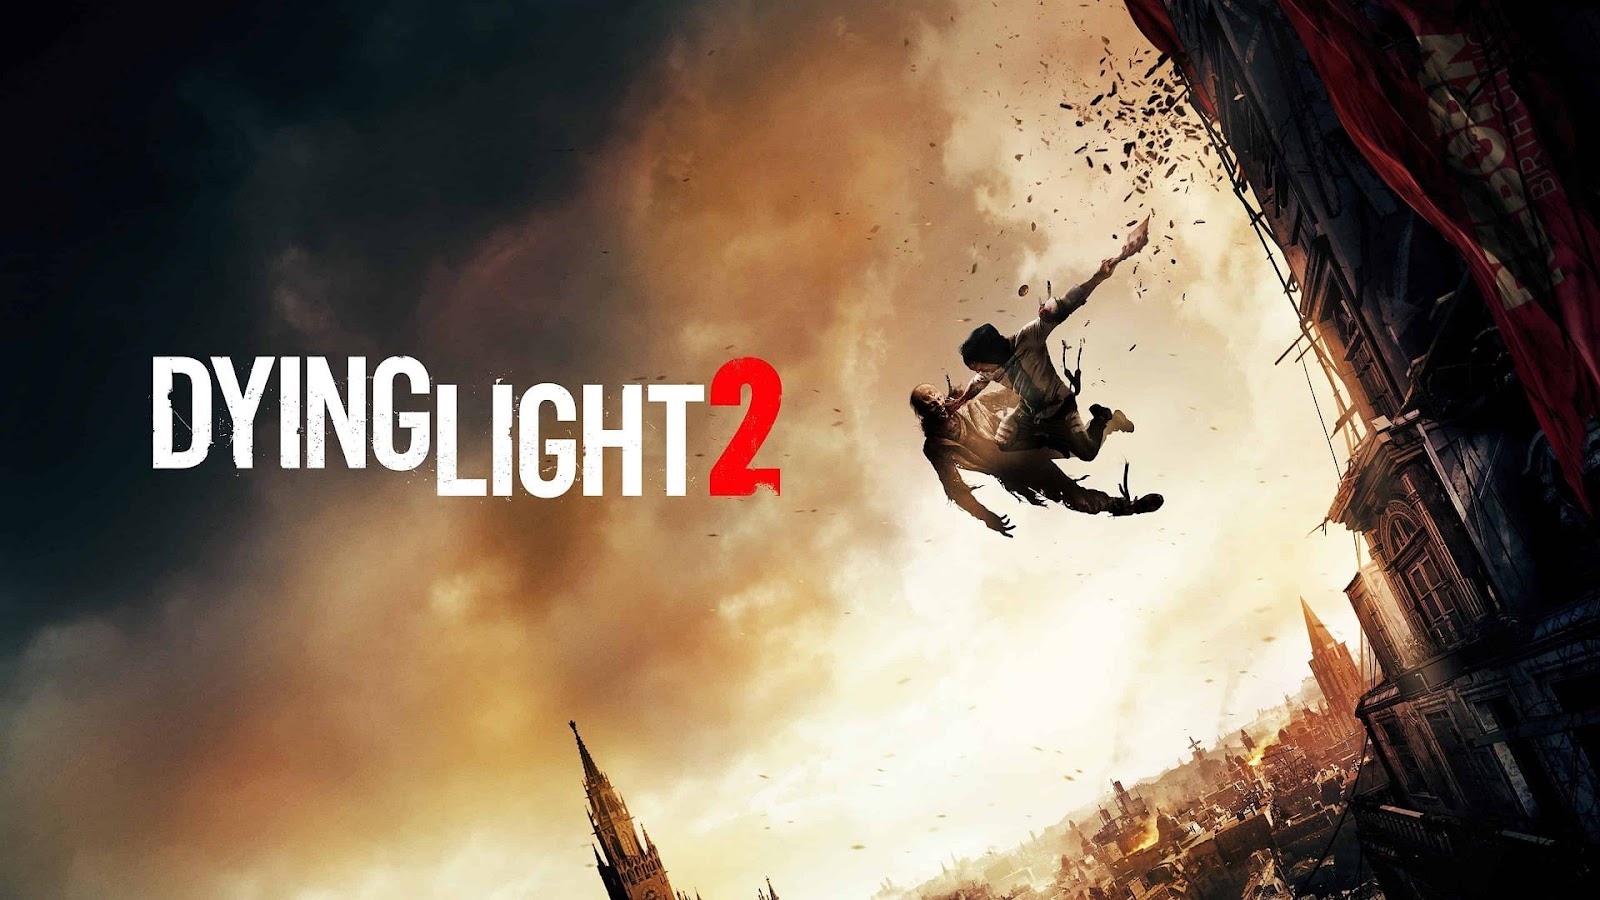 Dying Light 2 Stay Human: Dying Laugh Bundle